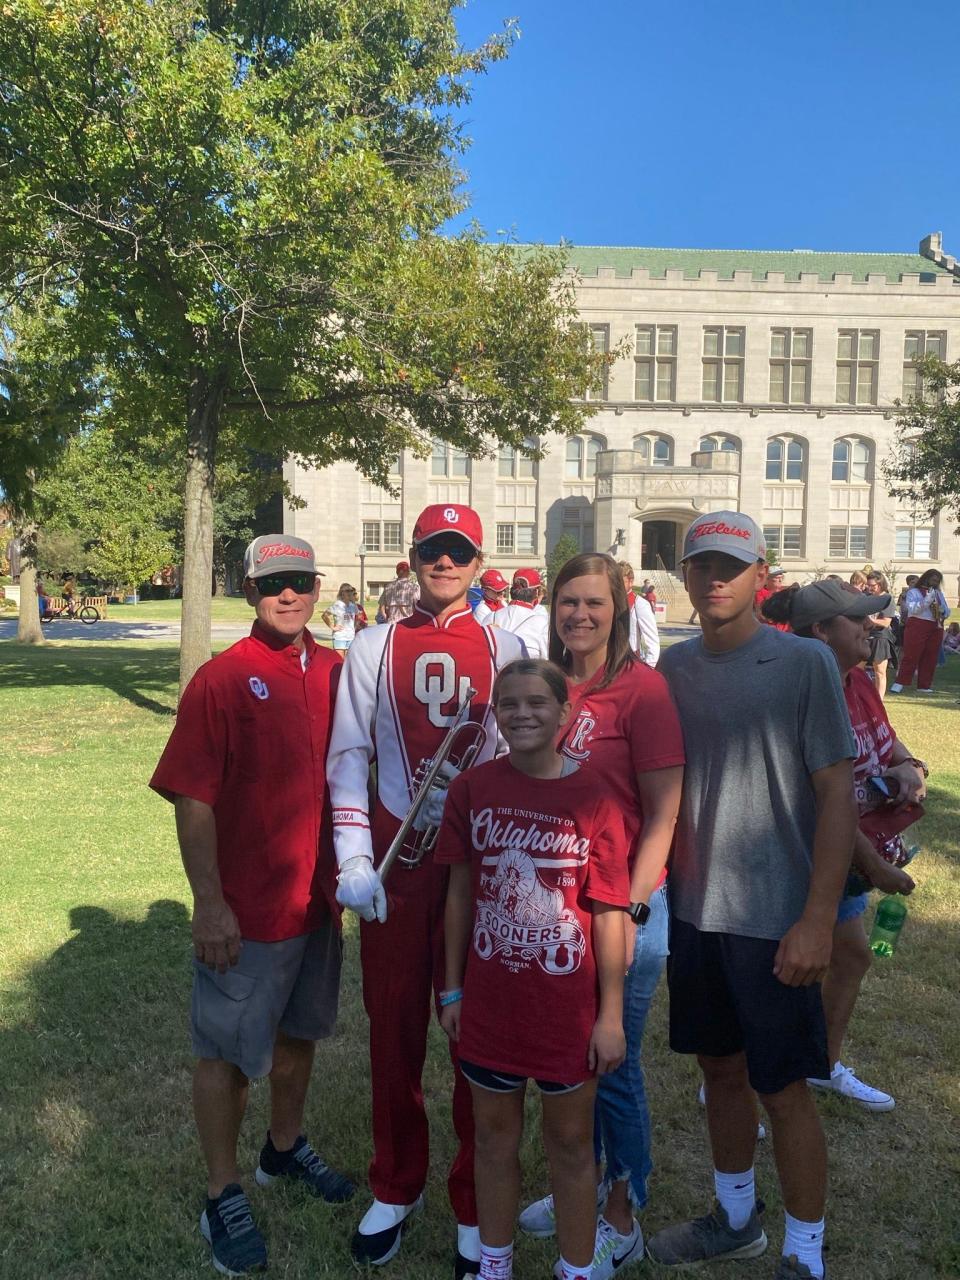 Cale Richardson from Dale, a trumpet player in the Pride of Oklahoma, is pictured on campus with his family.